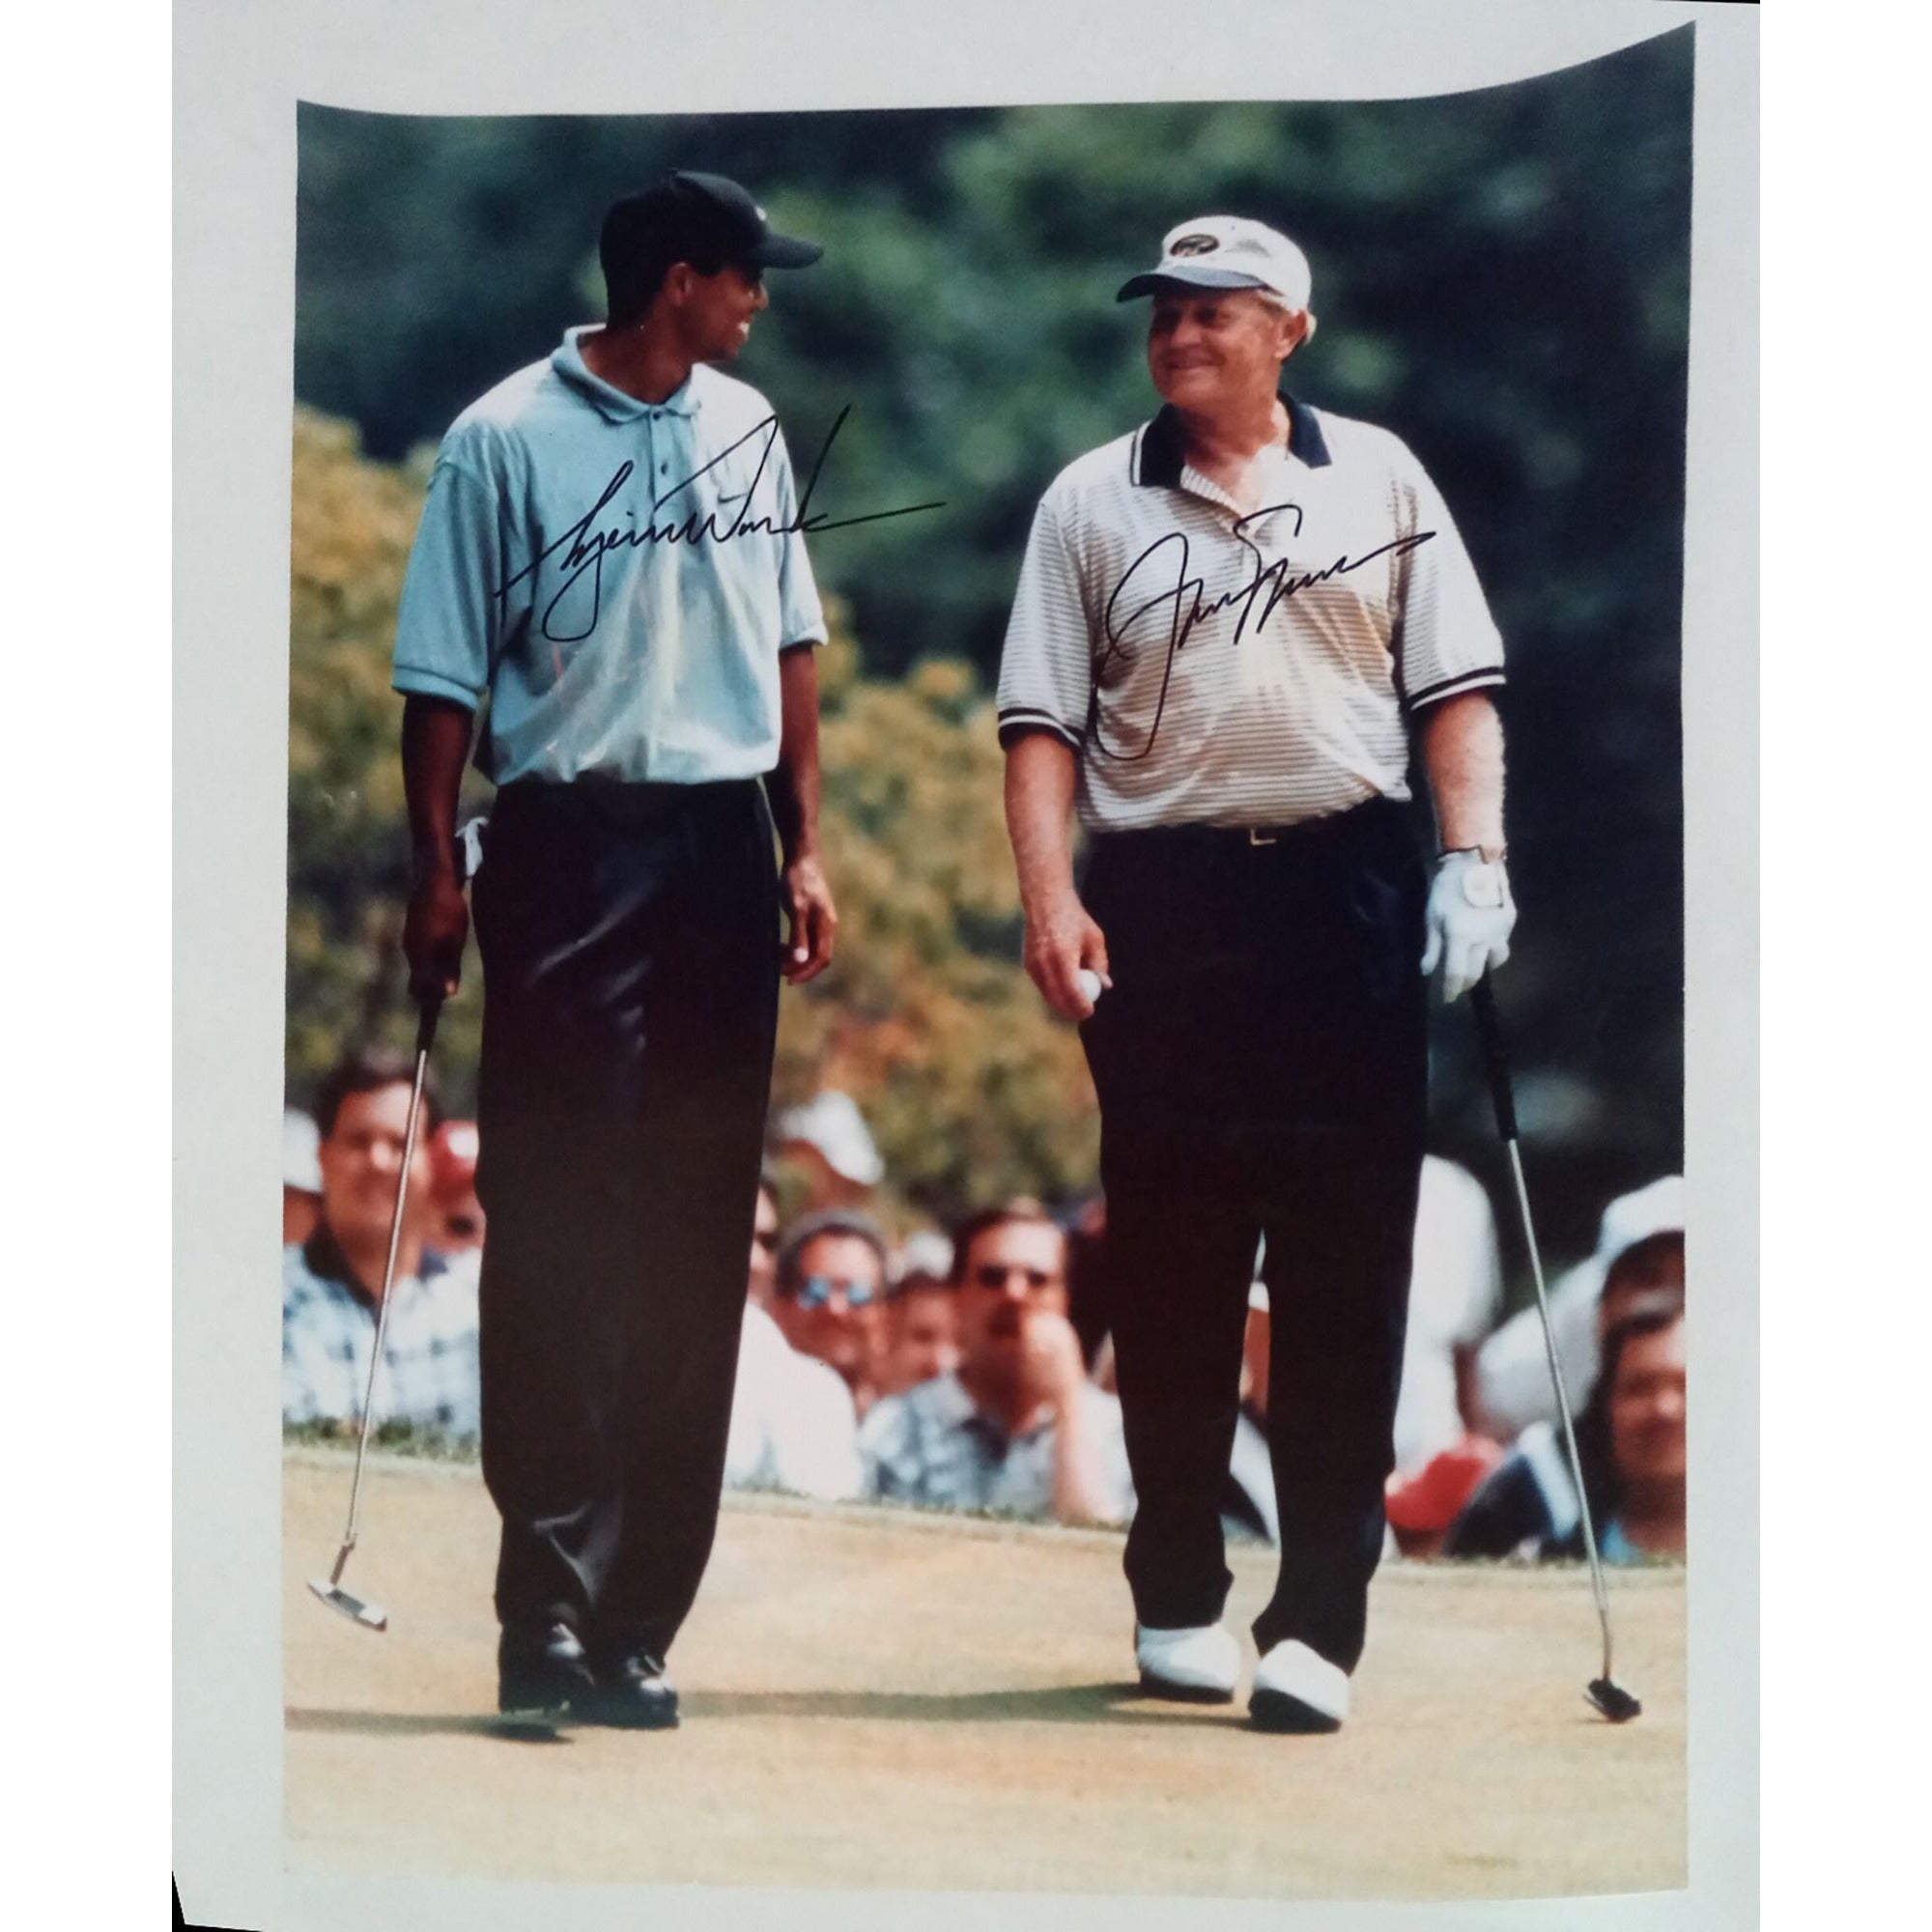 Jack Nicklaus and Tiger Woods 16 by 20 photo signed with proof